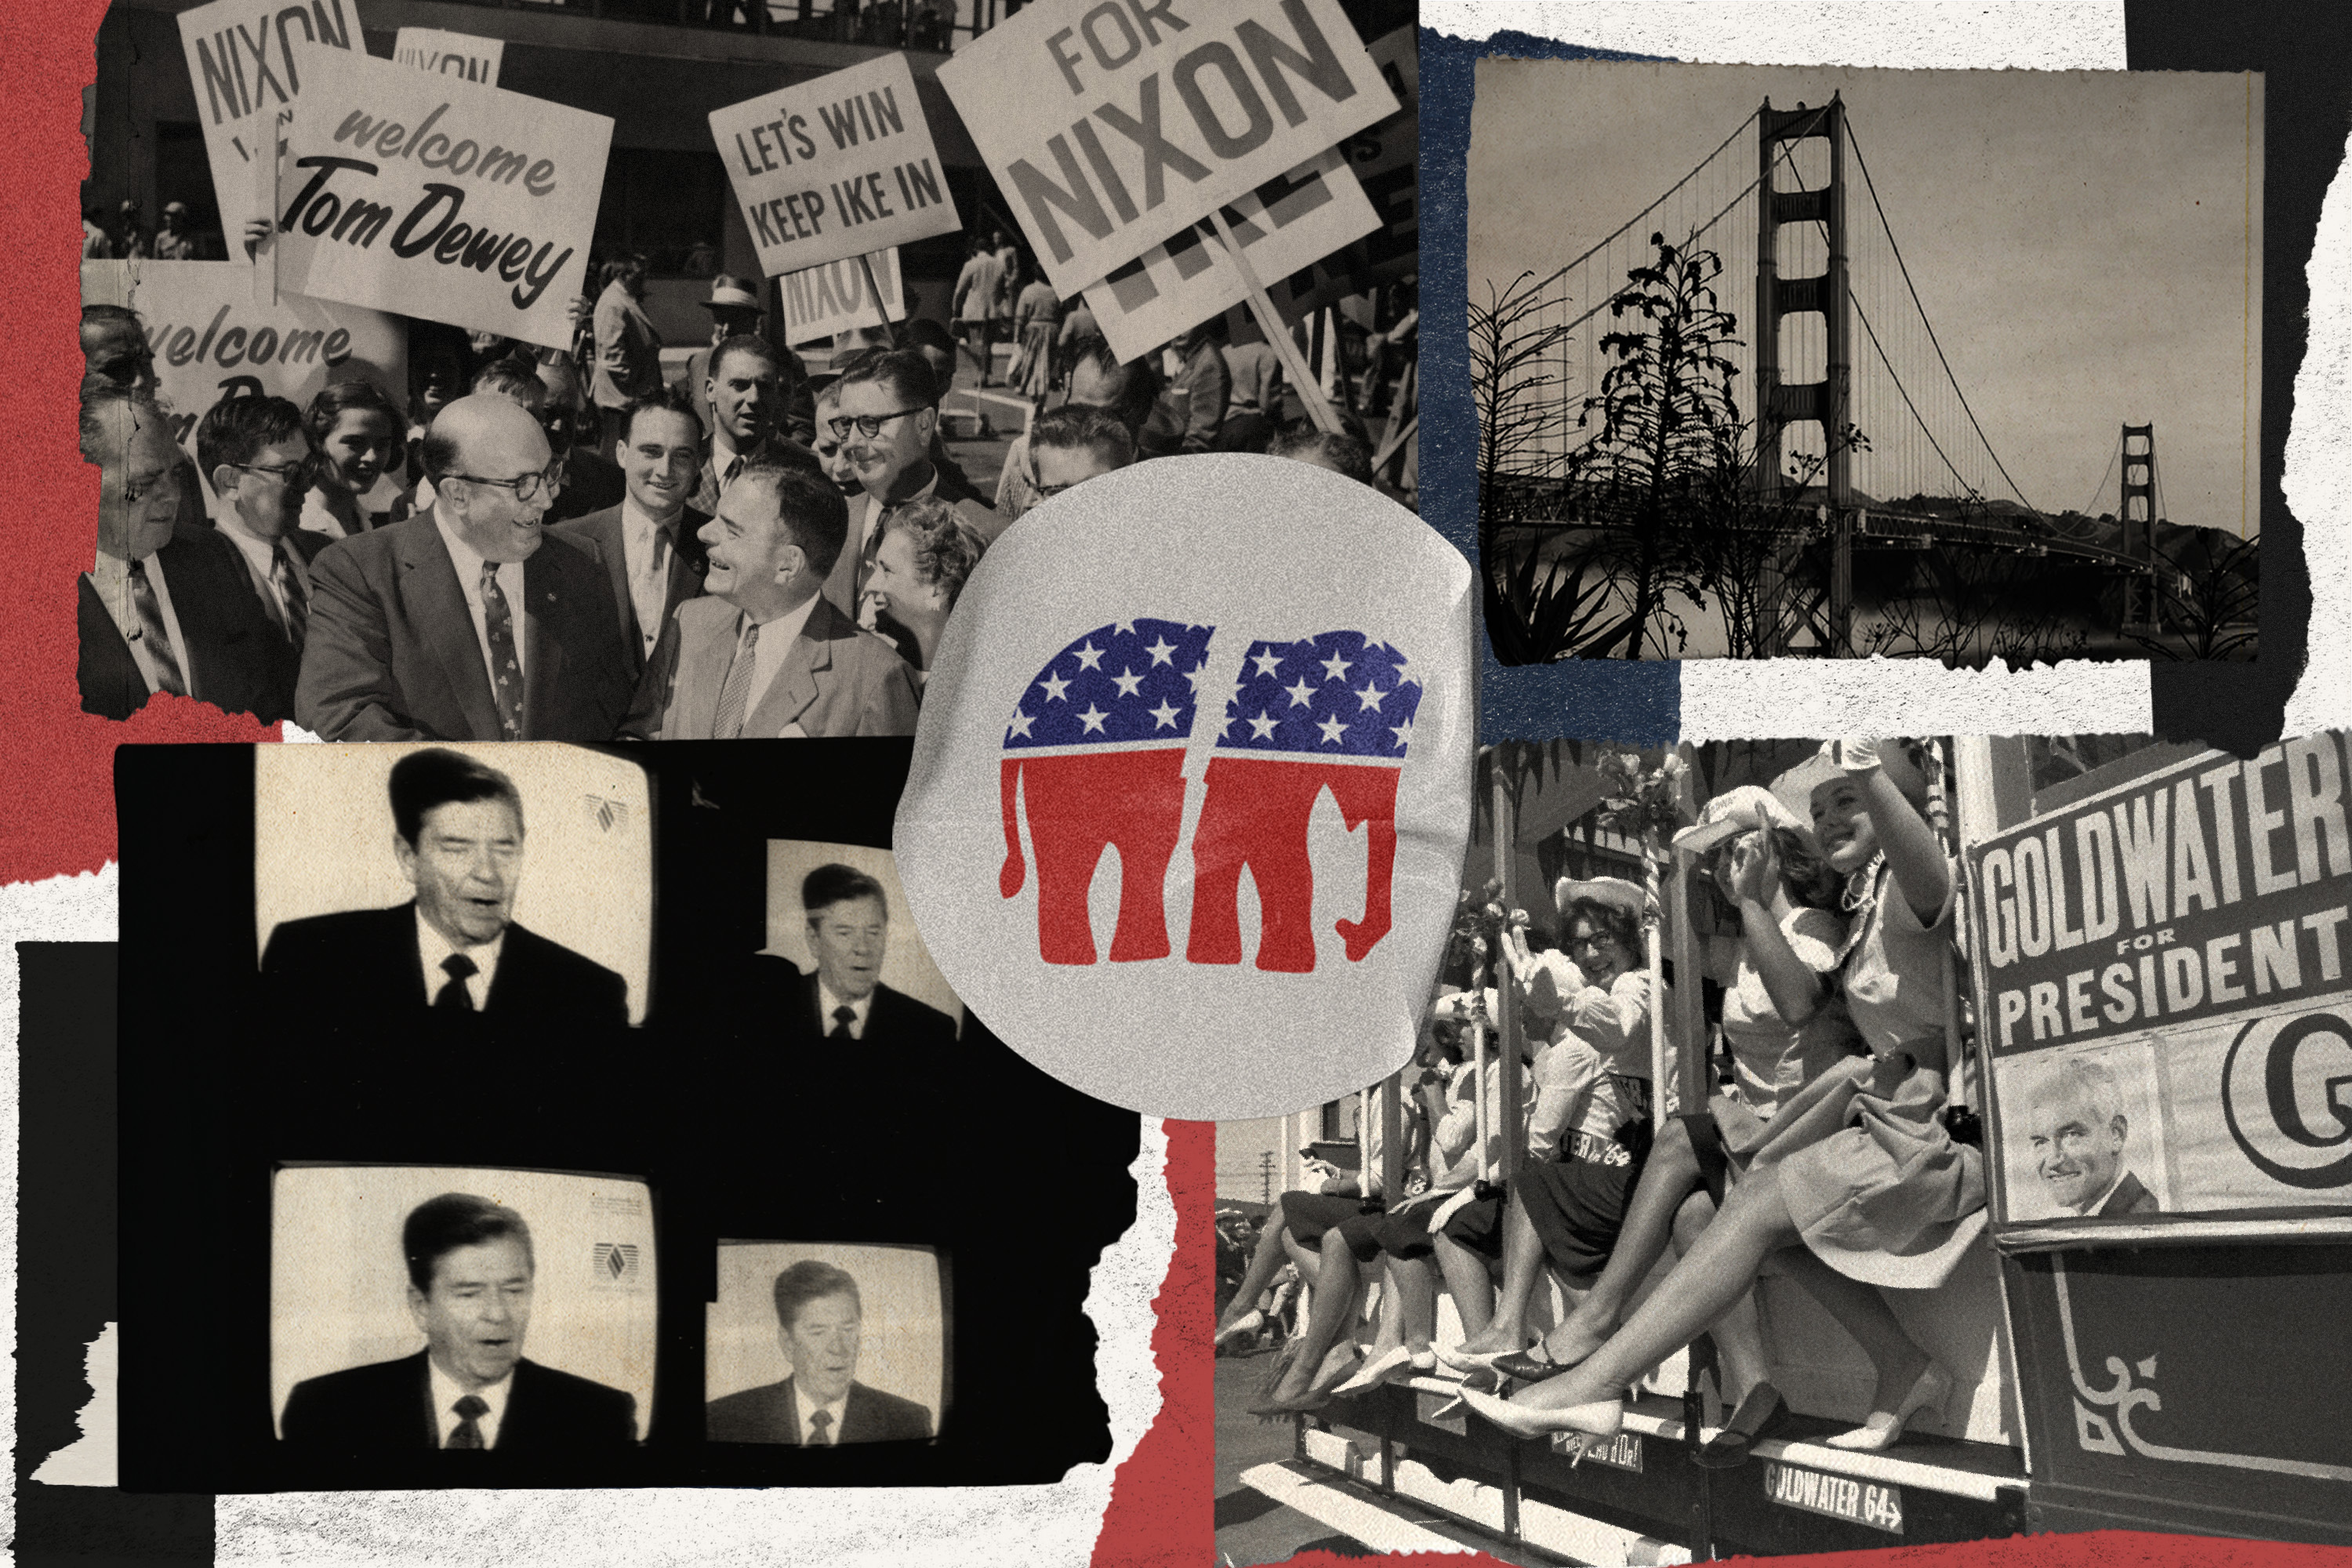 An illustration featuring a variety of archival photos of GOP faces including Barry Goldwater, Ronald Reagan and the GOP elephant.